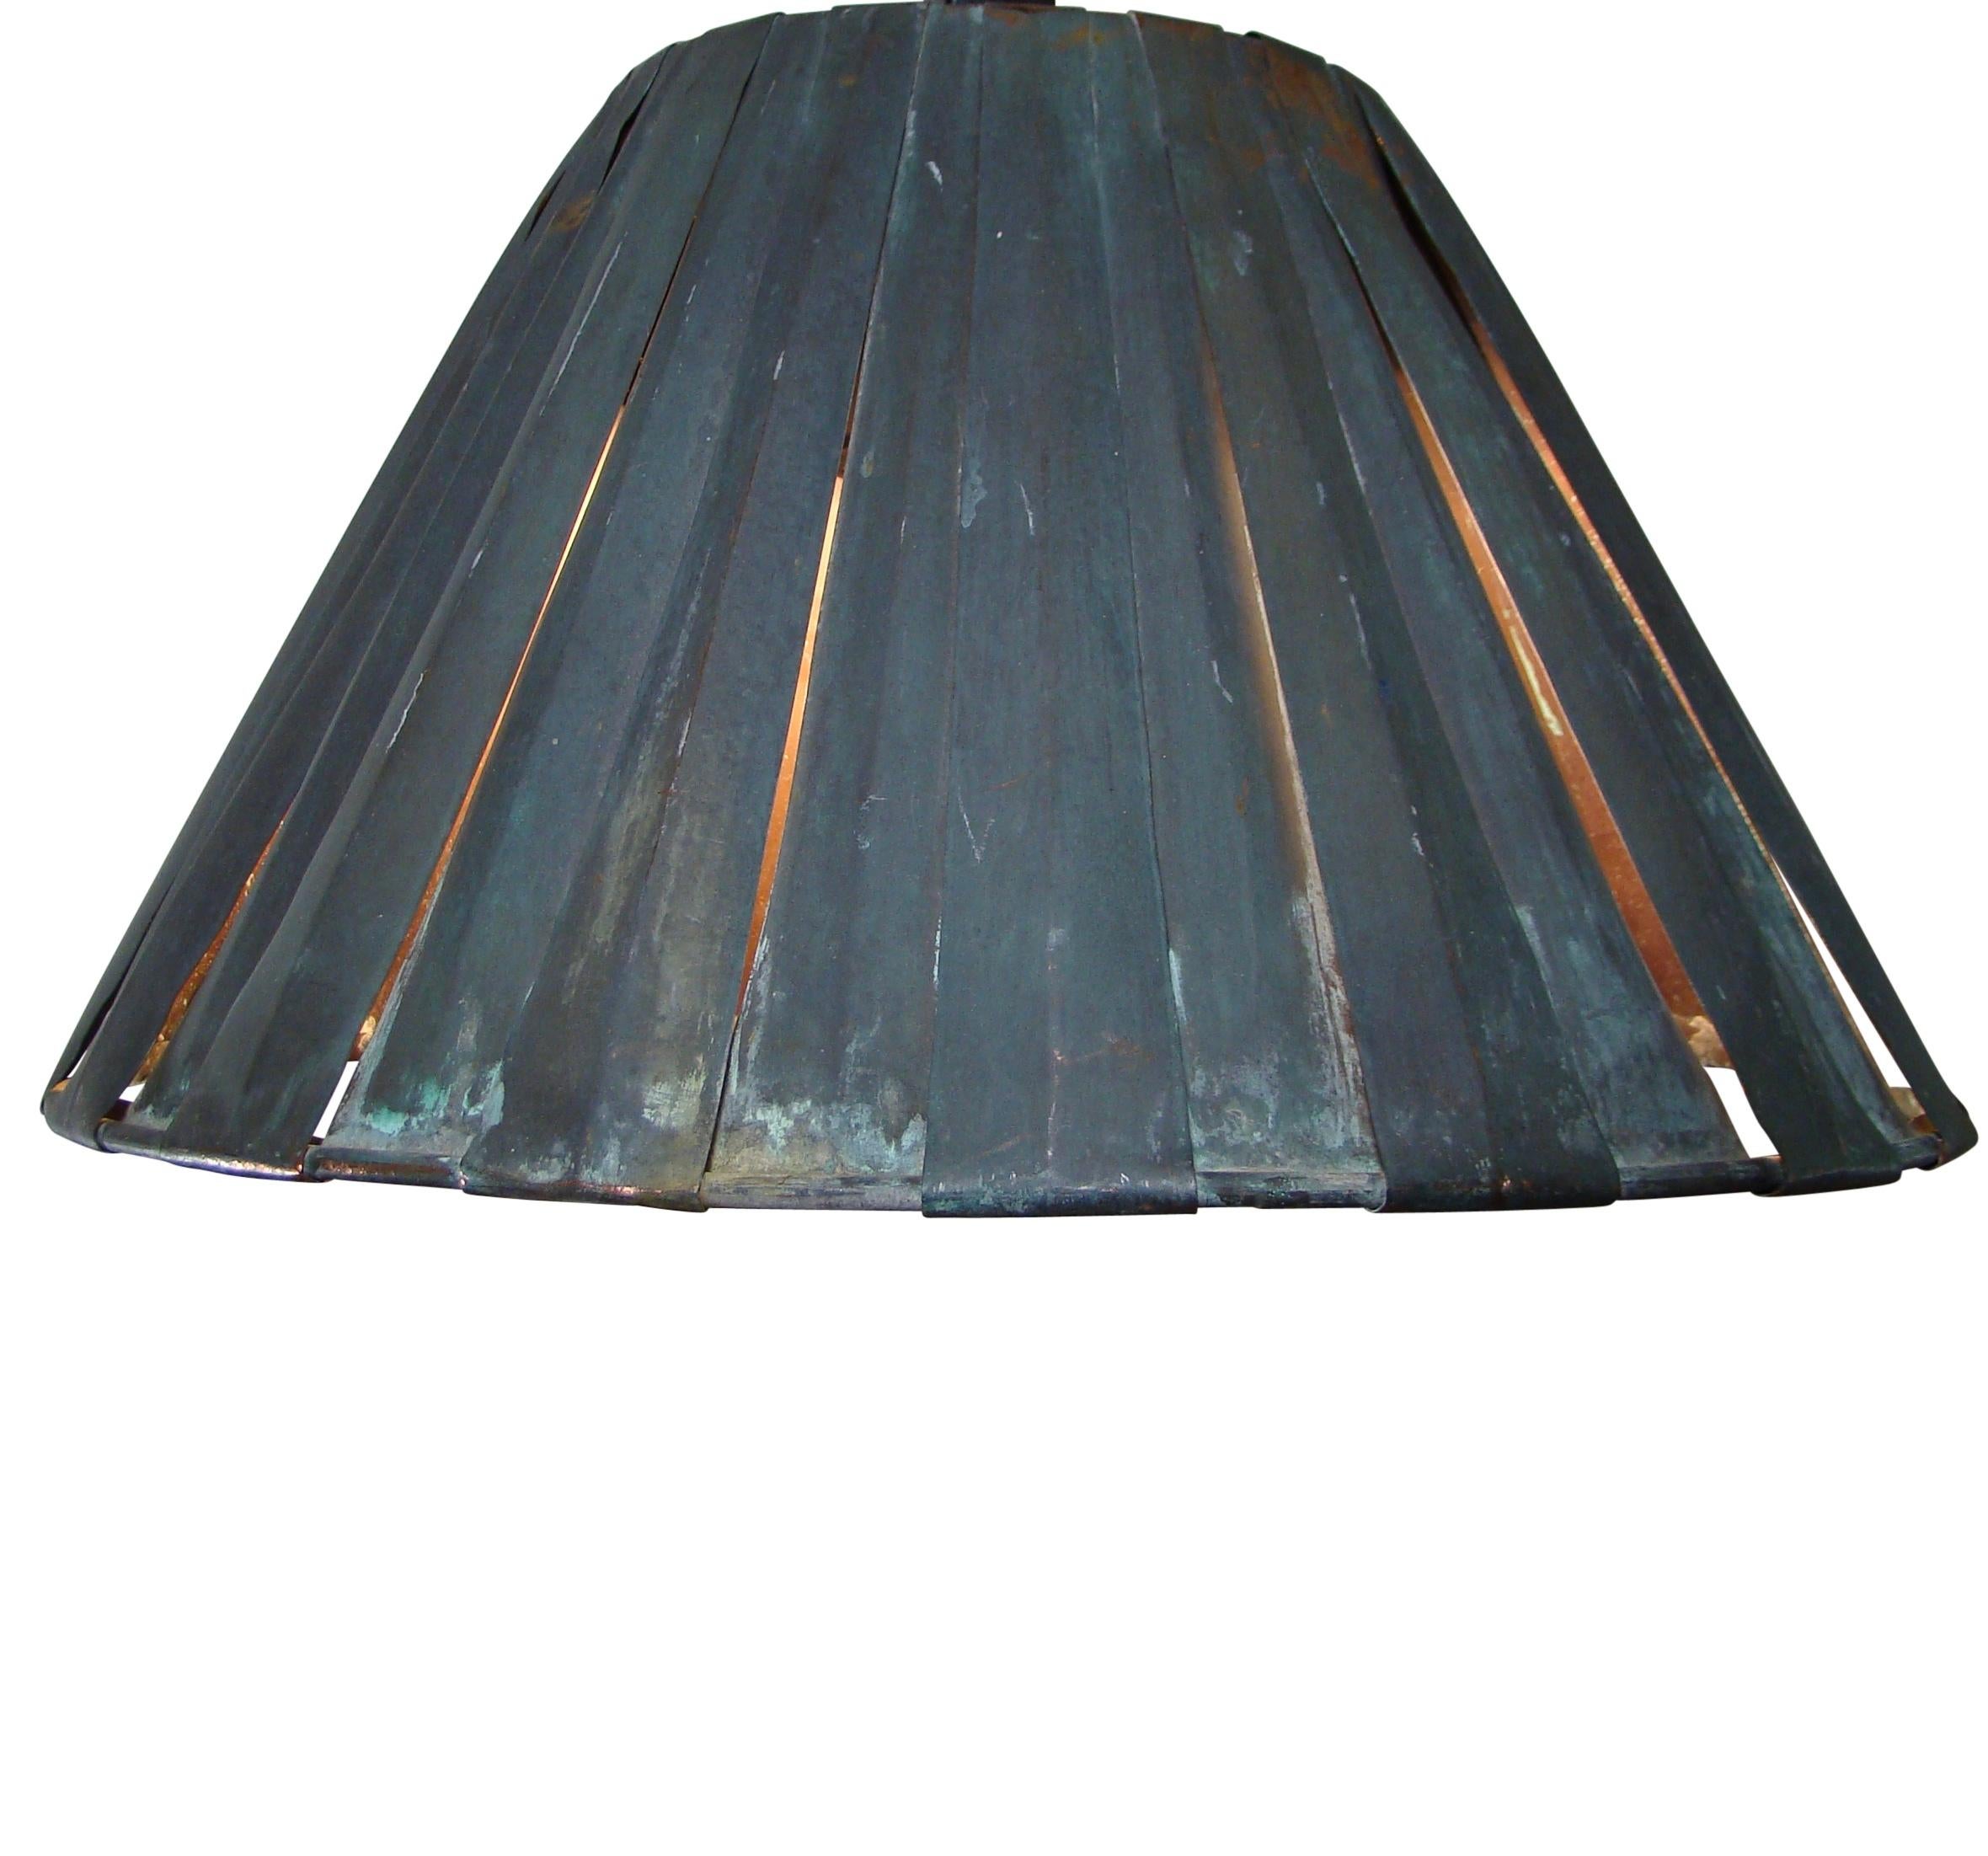 Patinated Large Industrial Vintage Copper Pendant In Shape Of A Lamp Shade For Sale